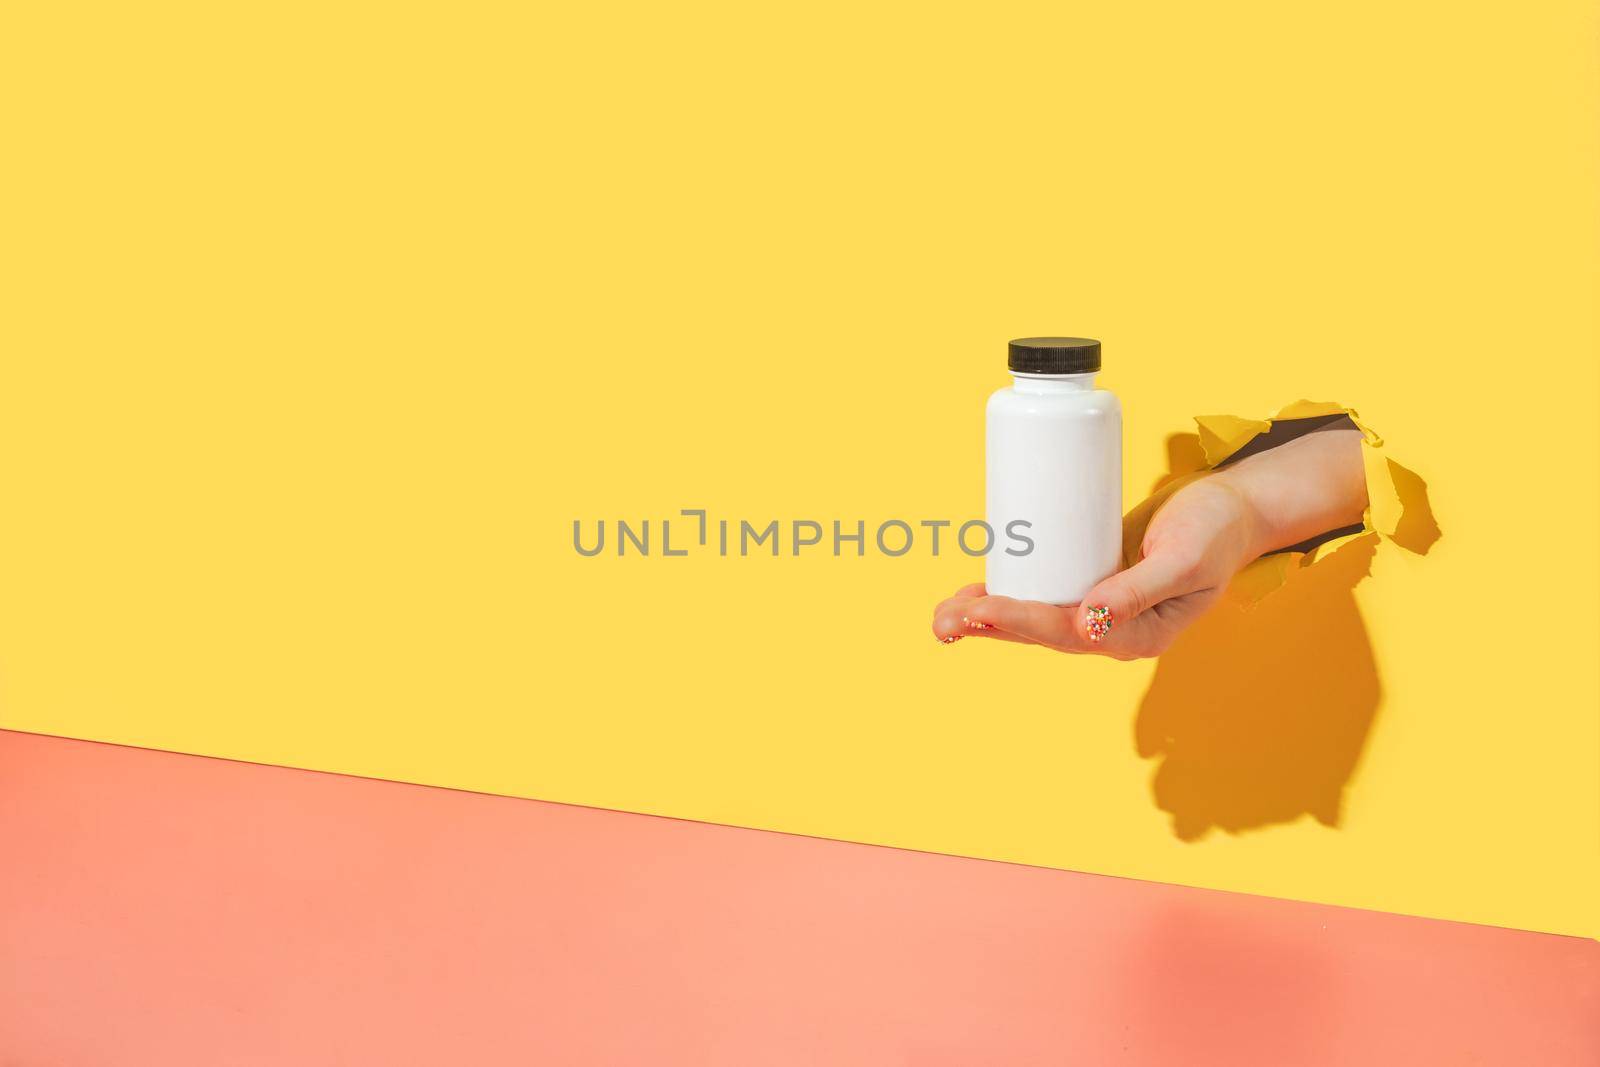 Empty white medical container for vitamins in female hand with sprinkle manicure through torn bright yellow paper background. Oral supplements, immune support, biohacking creative concept. Copy space